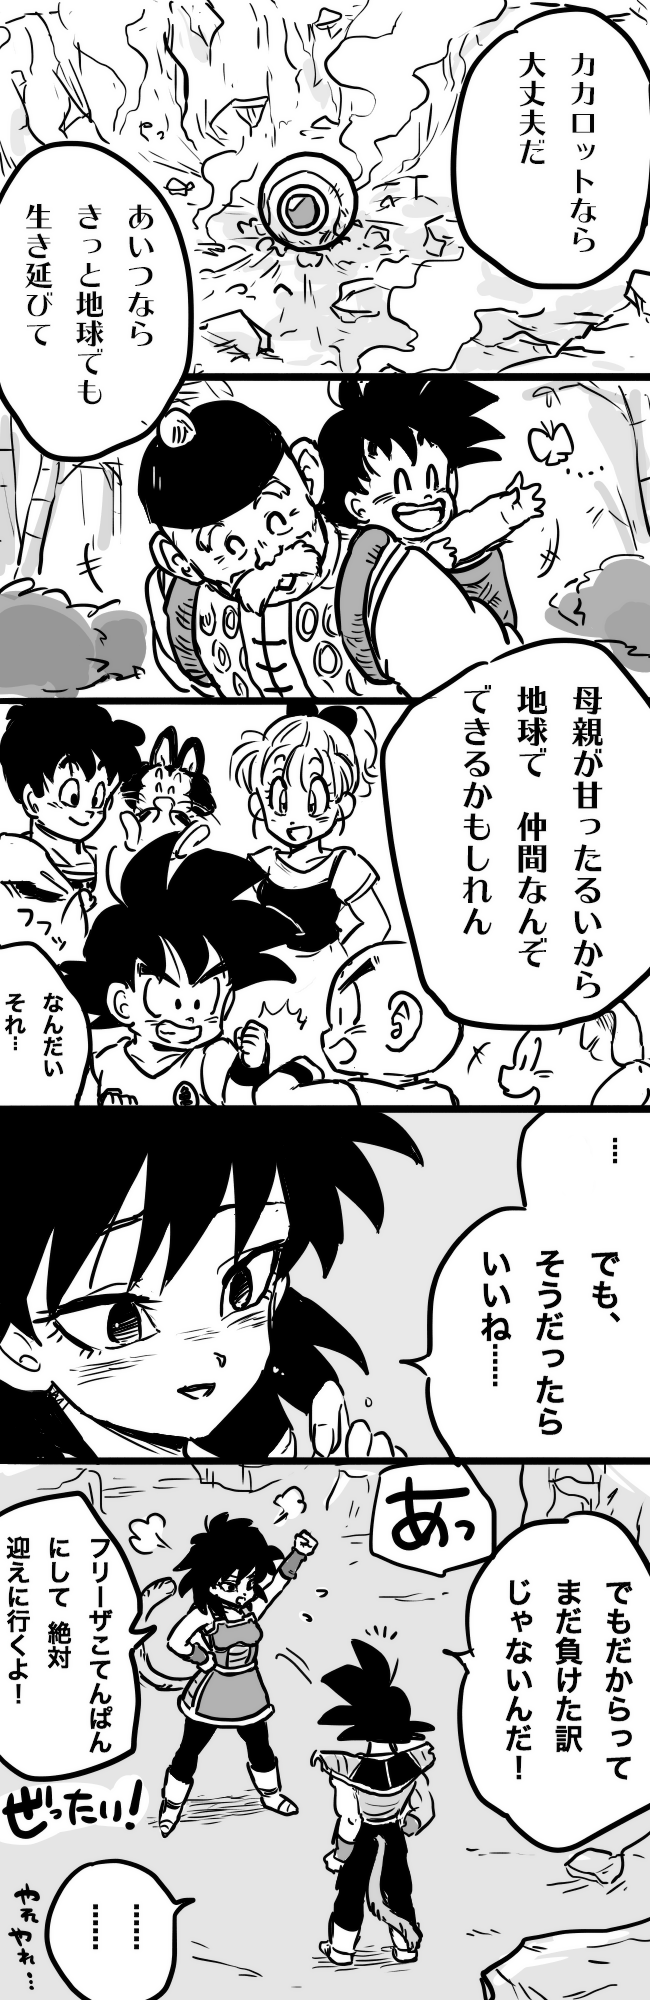 ... /\/\/\ 2girls 6+boys =3 armor baby bardock black black_hair blush bulma butterfly closed_eyes couple dragon_ball eyes facial_hair father_and_son fist_bump gine grandfather_and_grandson grandpa_gohan greyscale hand_on_hip highres kuririn looking_at_another monochrome mother_and_son multiple_boys multiple_girls mustache oolong panels puar smile son_gokuu space_craft speech_bubble tail tkgsize translation_request wristband yamcha